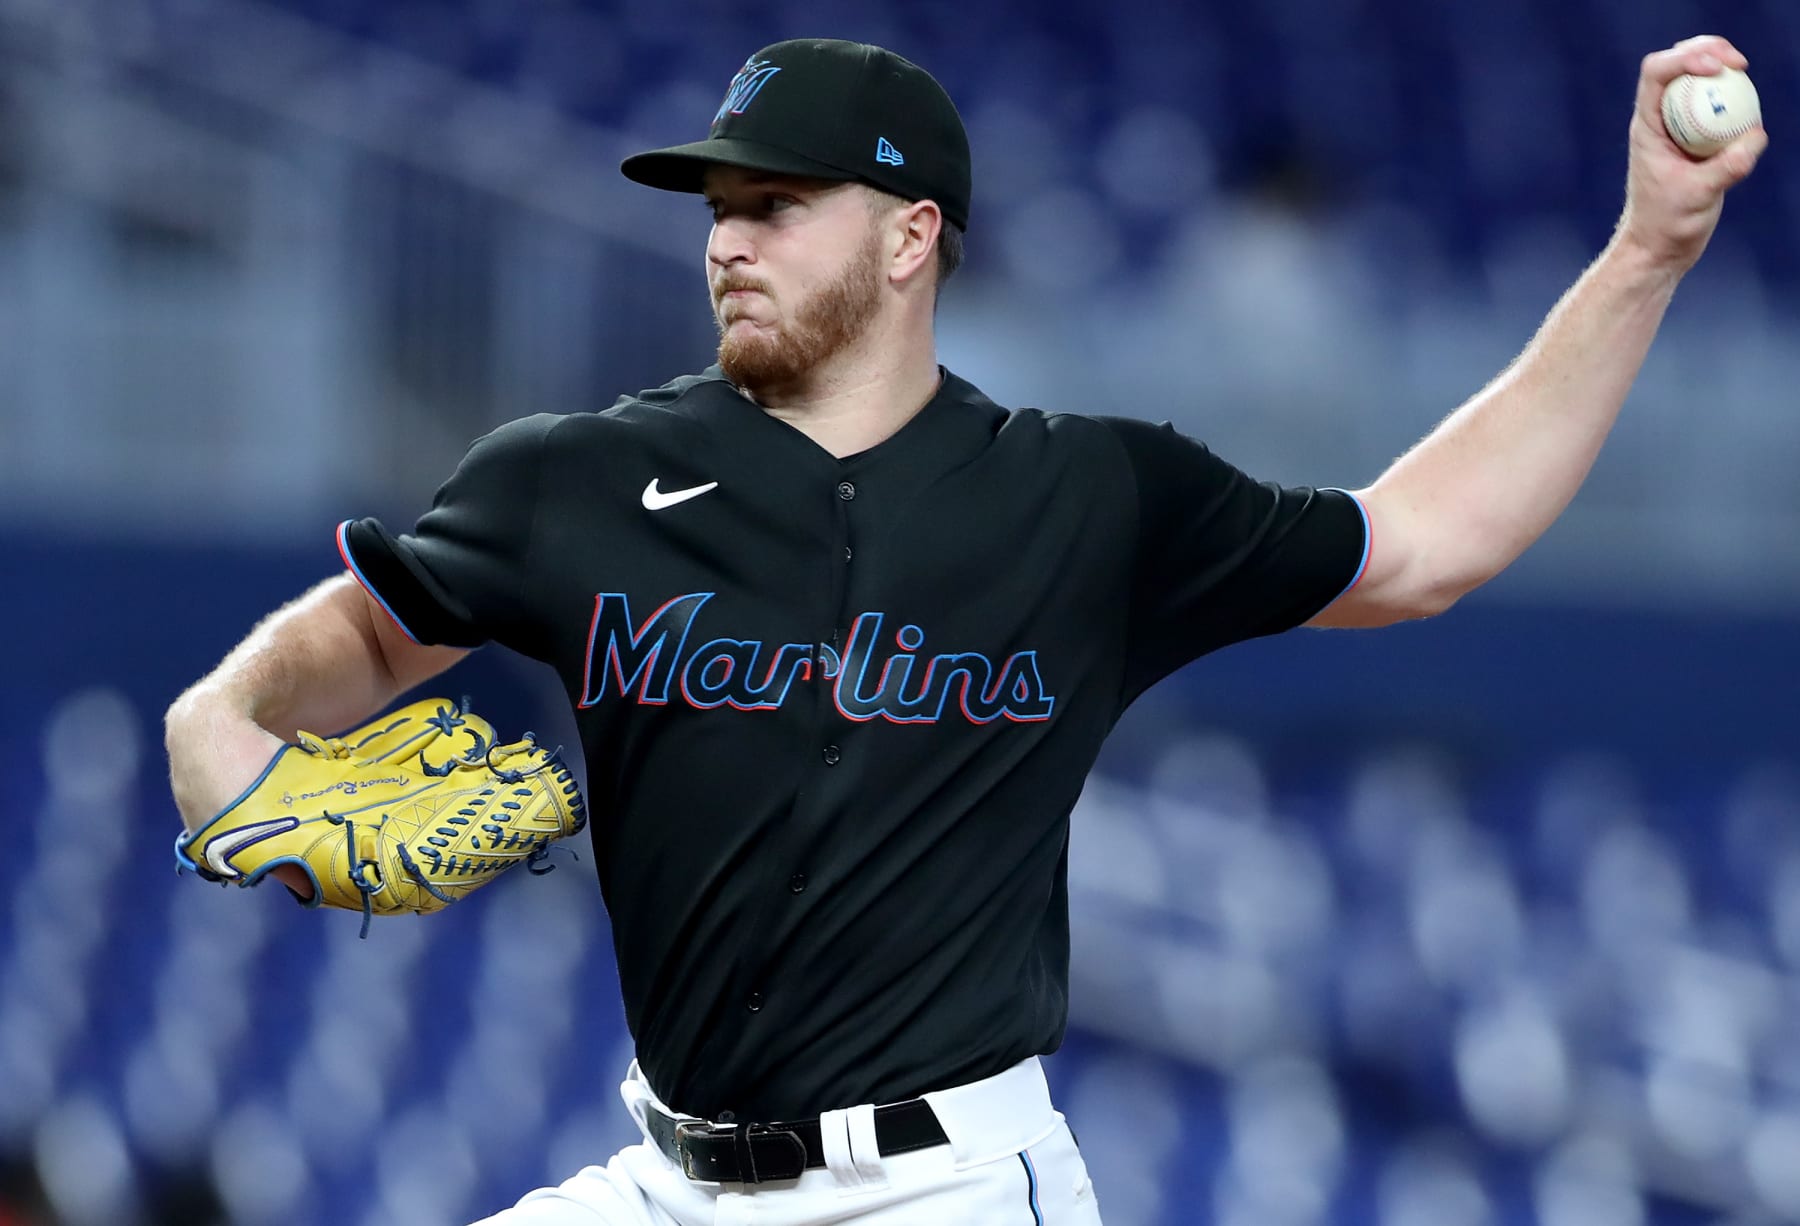 Miami Marlins: Who is Untouchable at the 2021 MLB Trade Deadline?